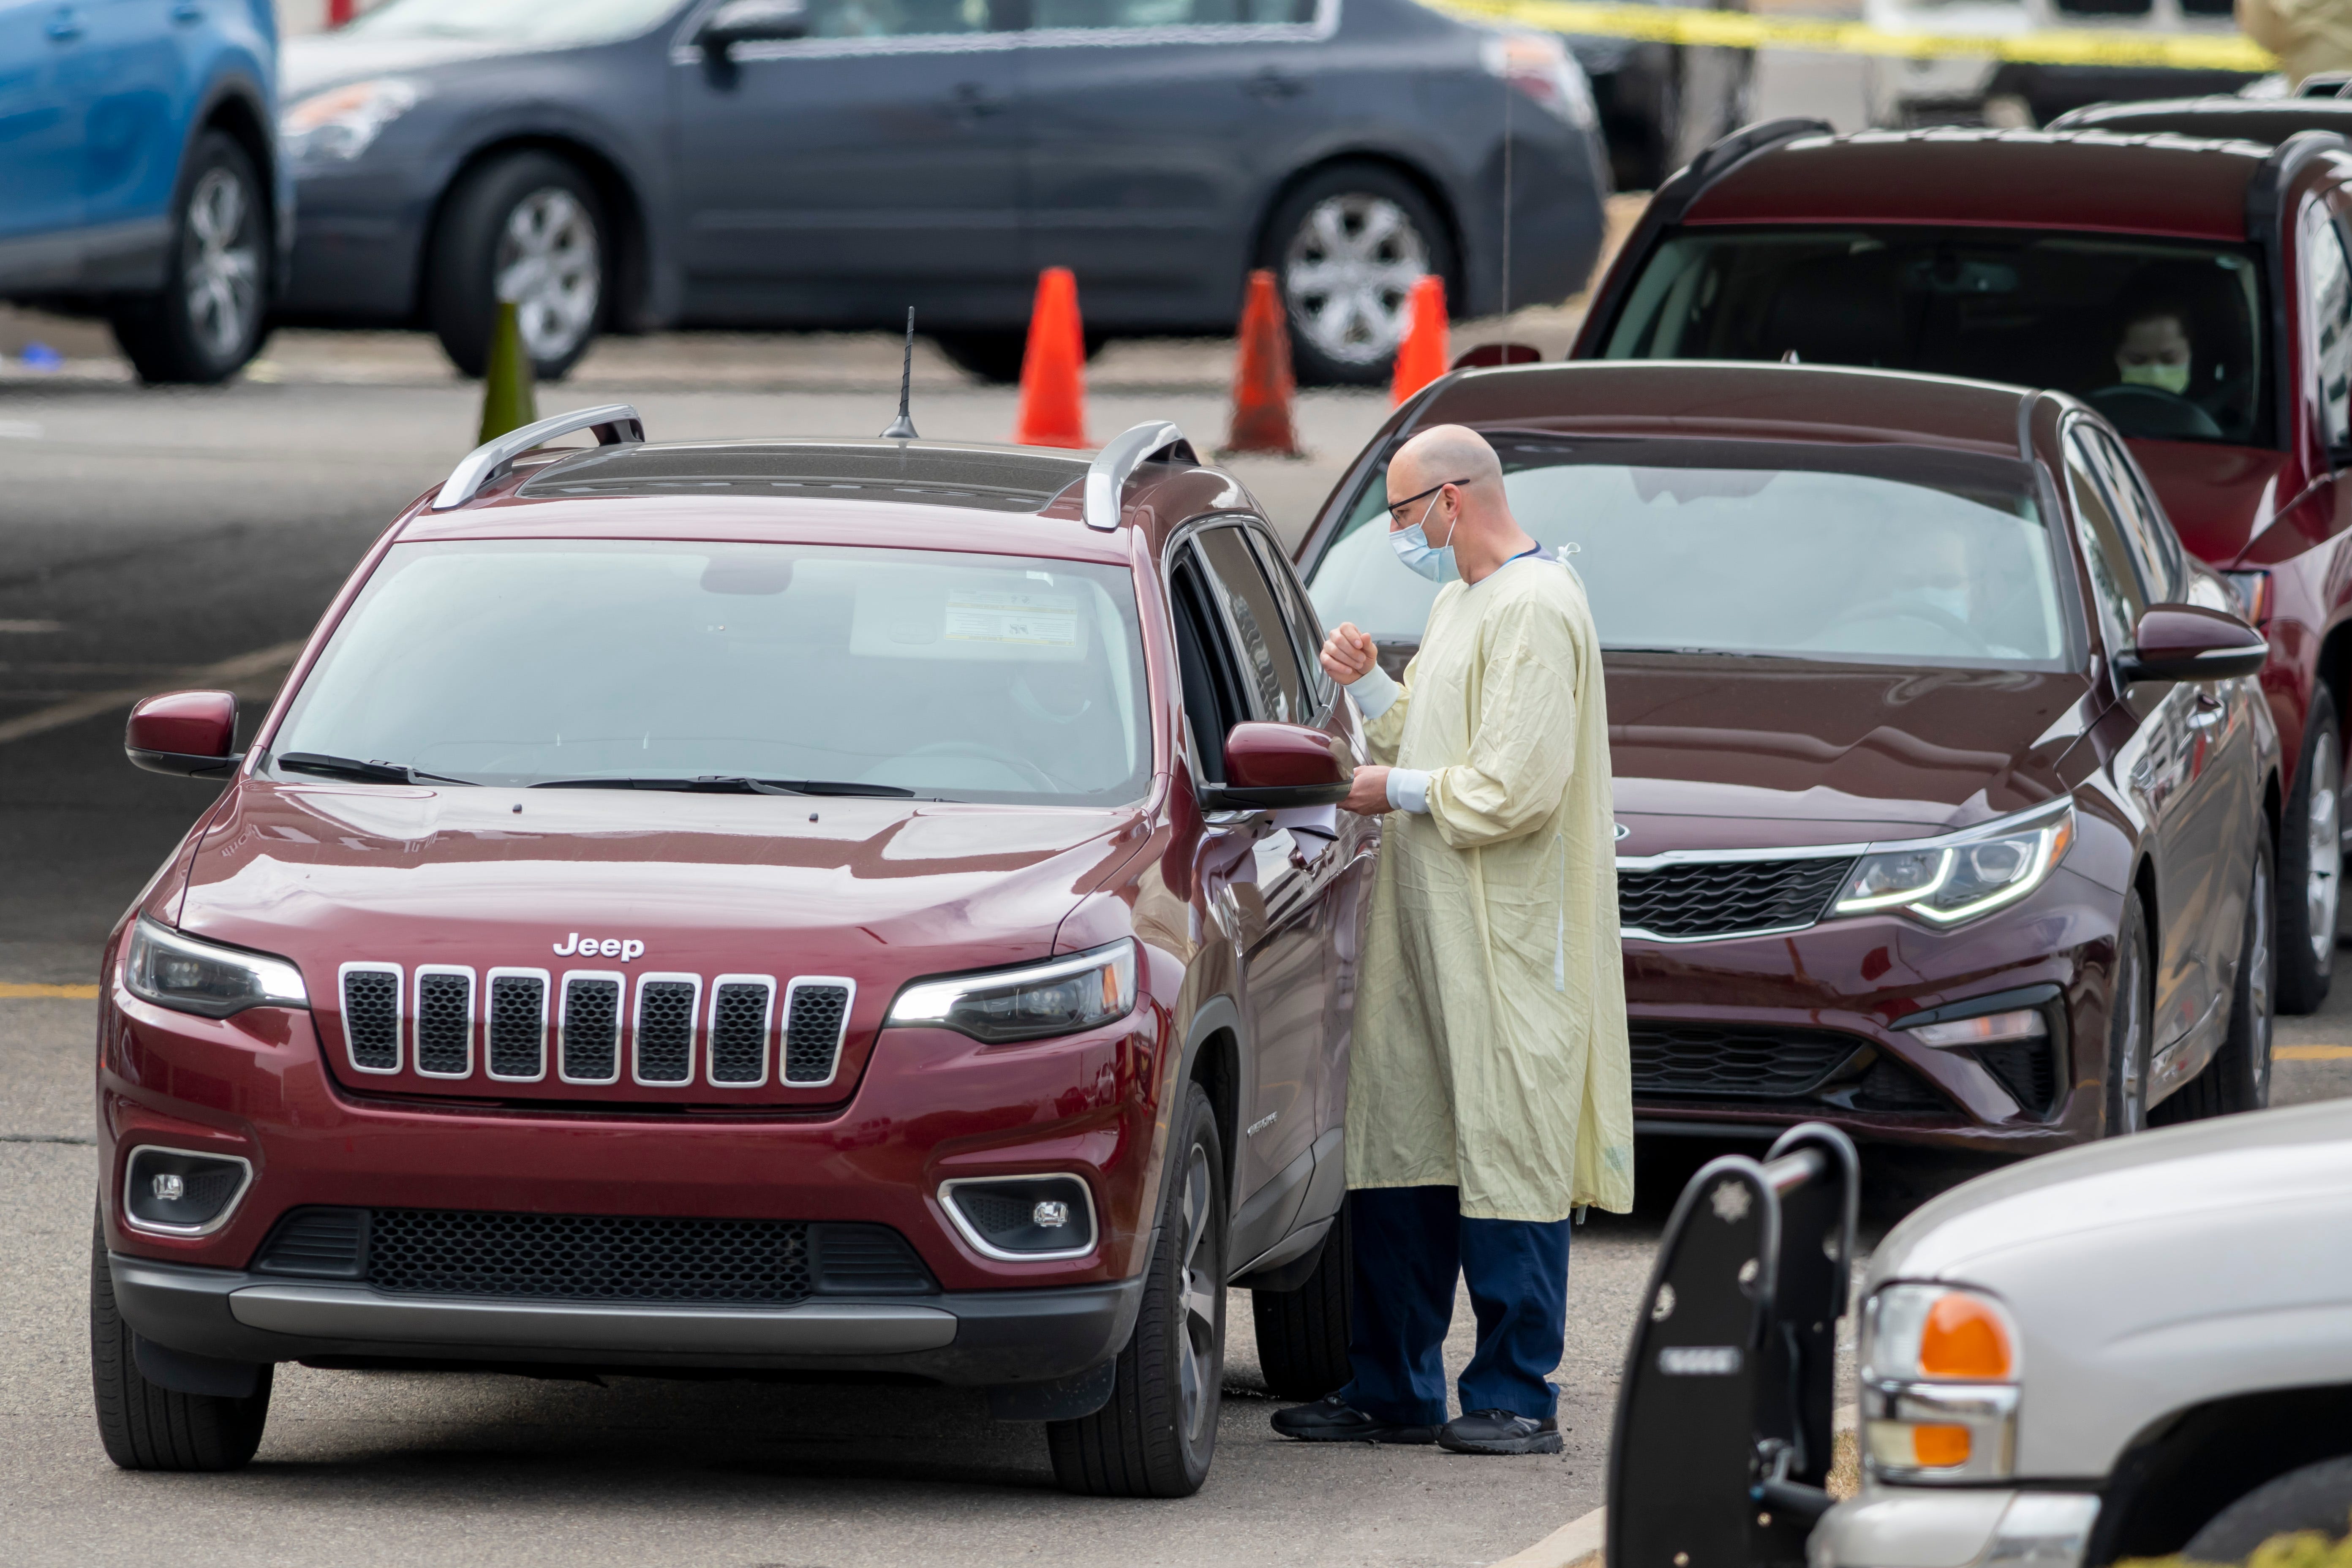 Patients are seen by medical staff during a drive-up screening process at Beaumont hospital in Royal Oak, March 16, 2020. Members of the public concerned that they may be infected with the coronavirus were able to get screening done from their vehicles.